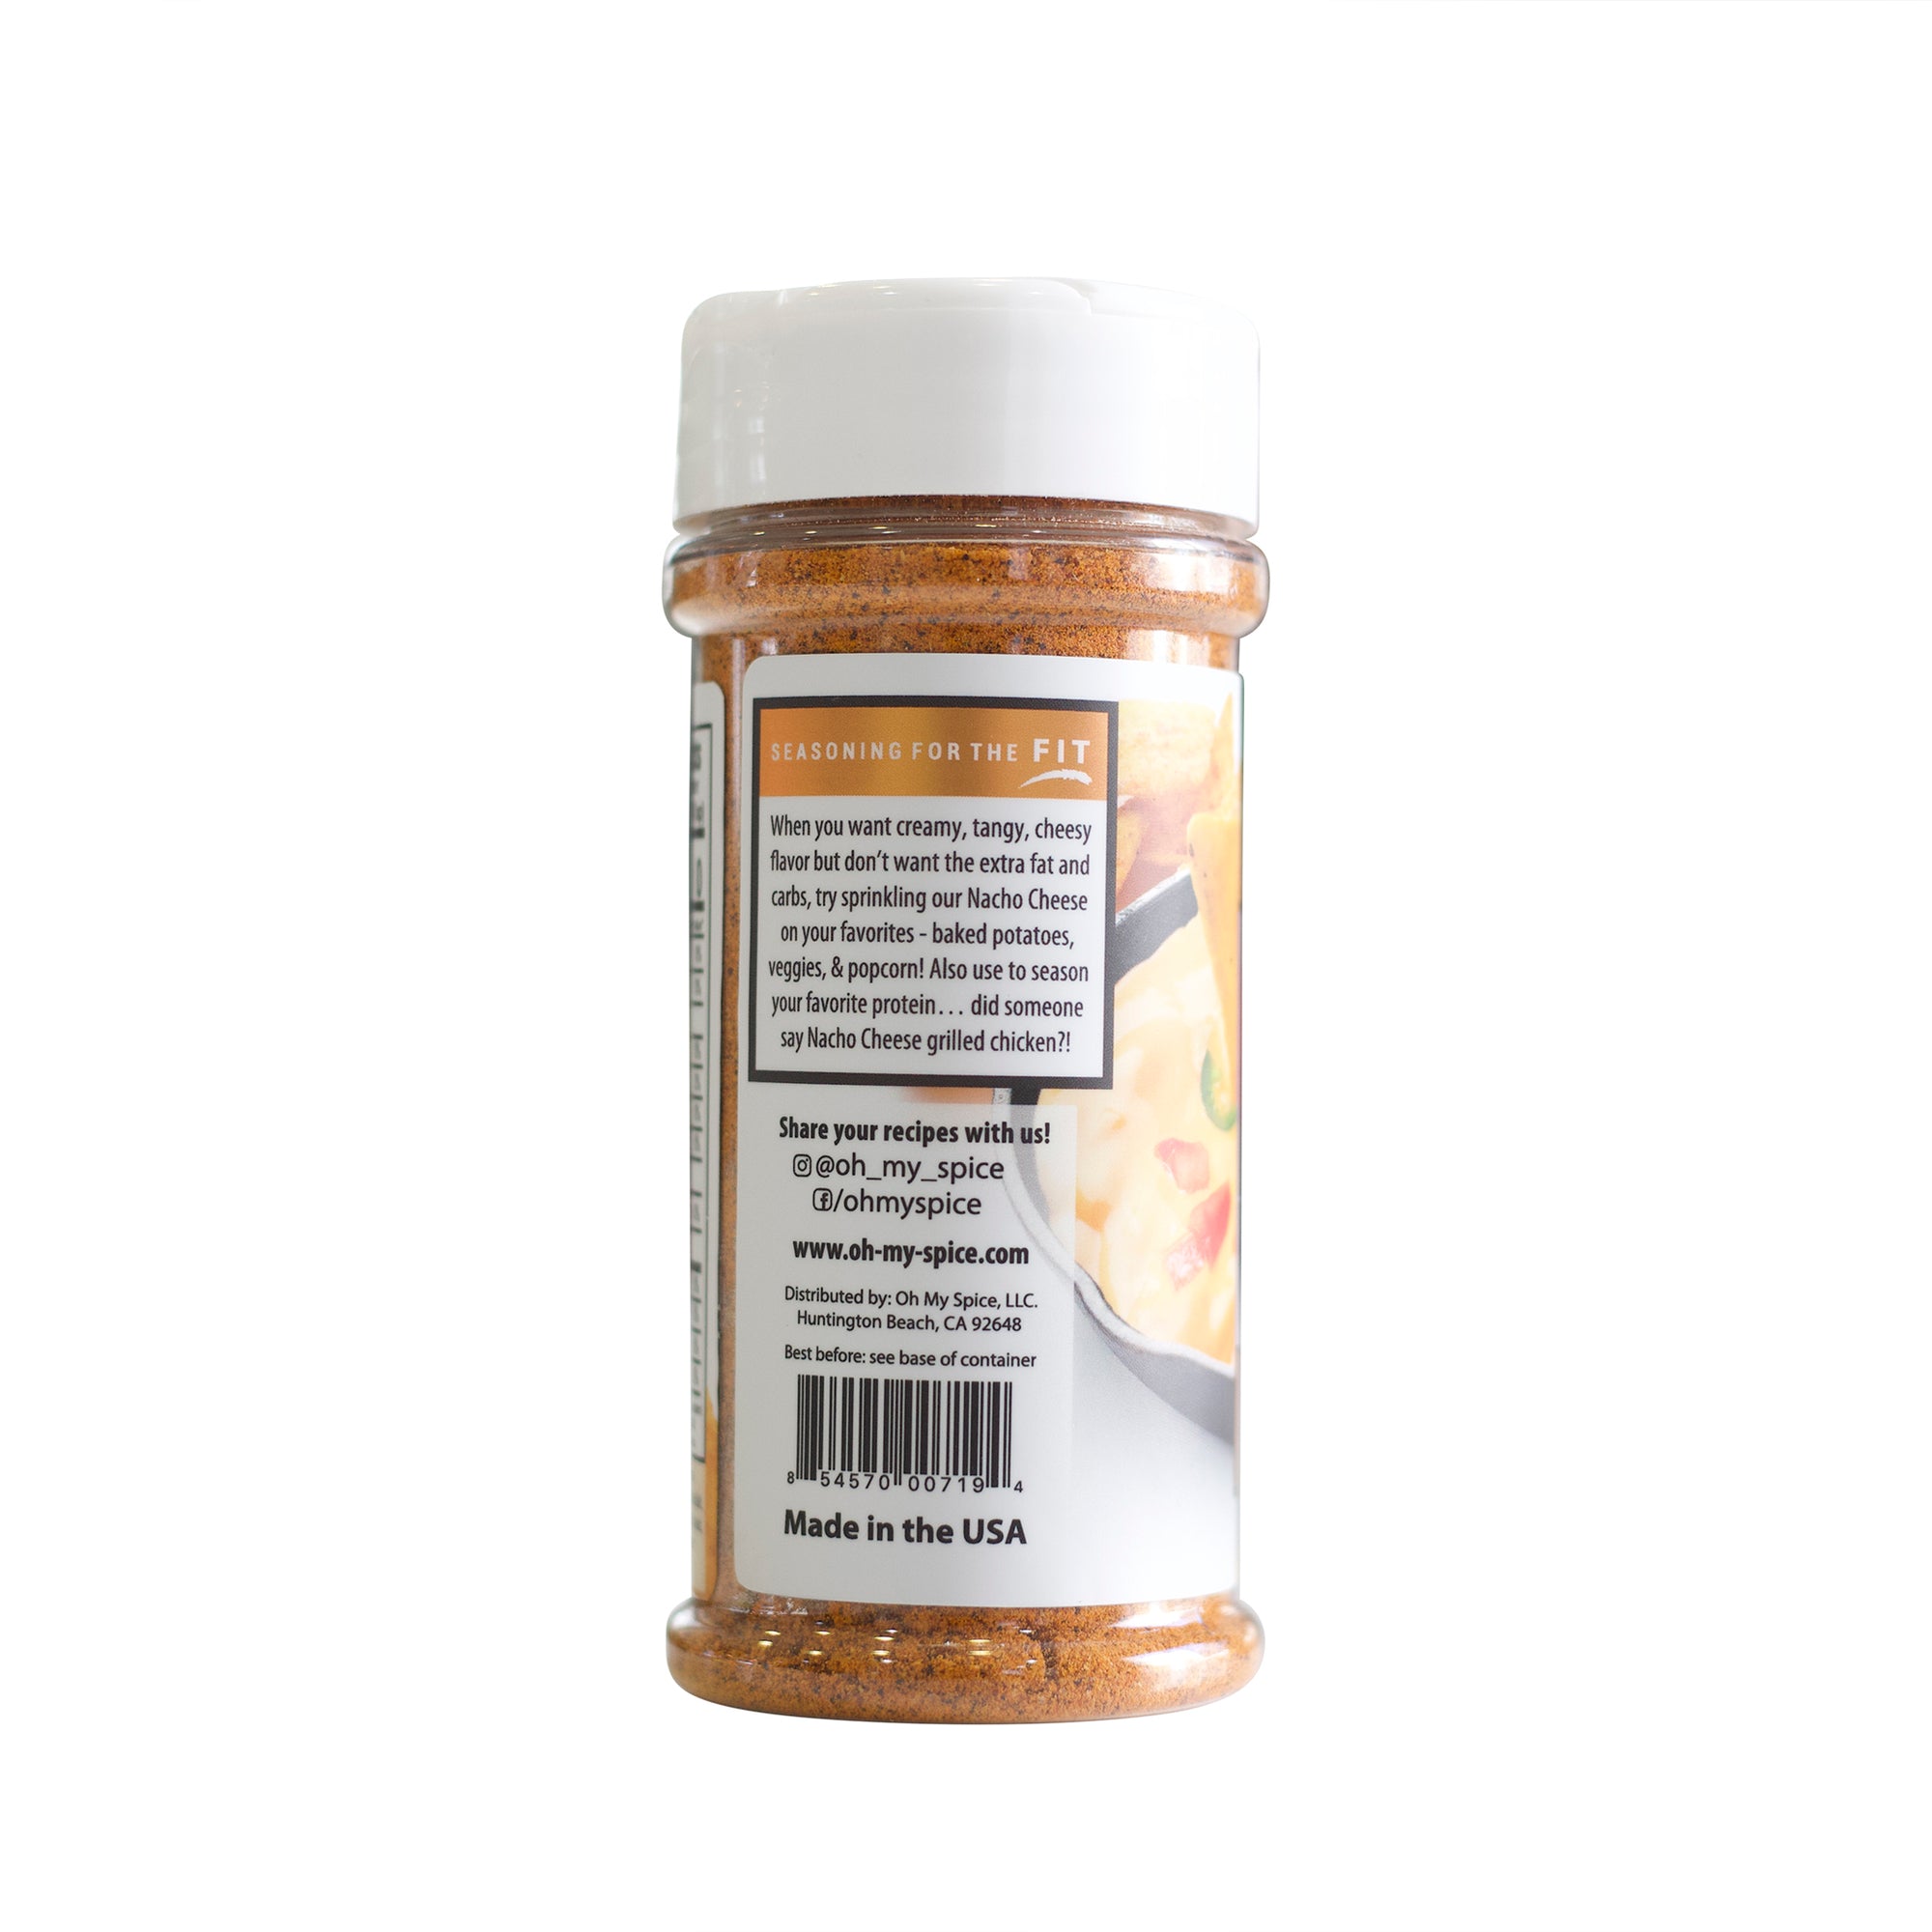 Browse all Spices and Seasonings Products